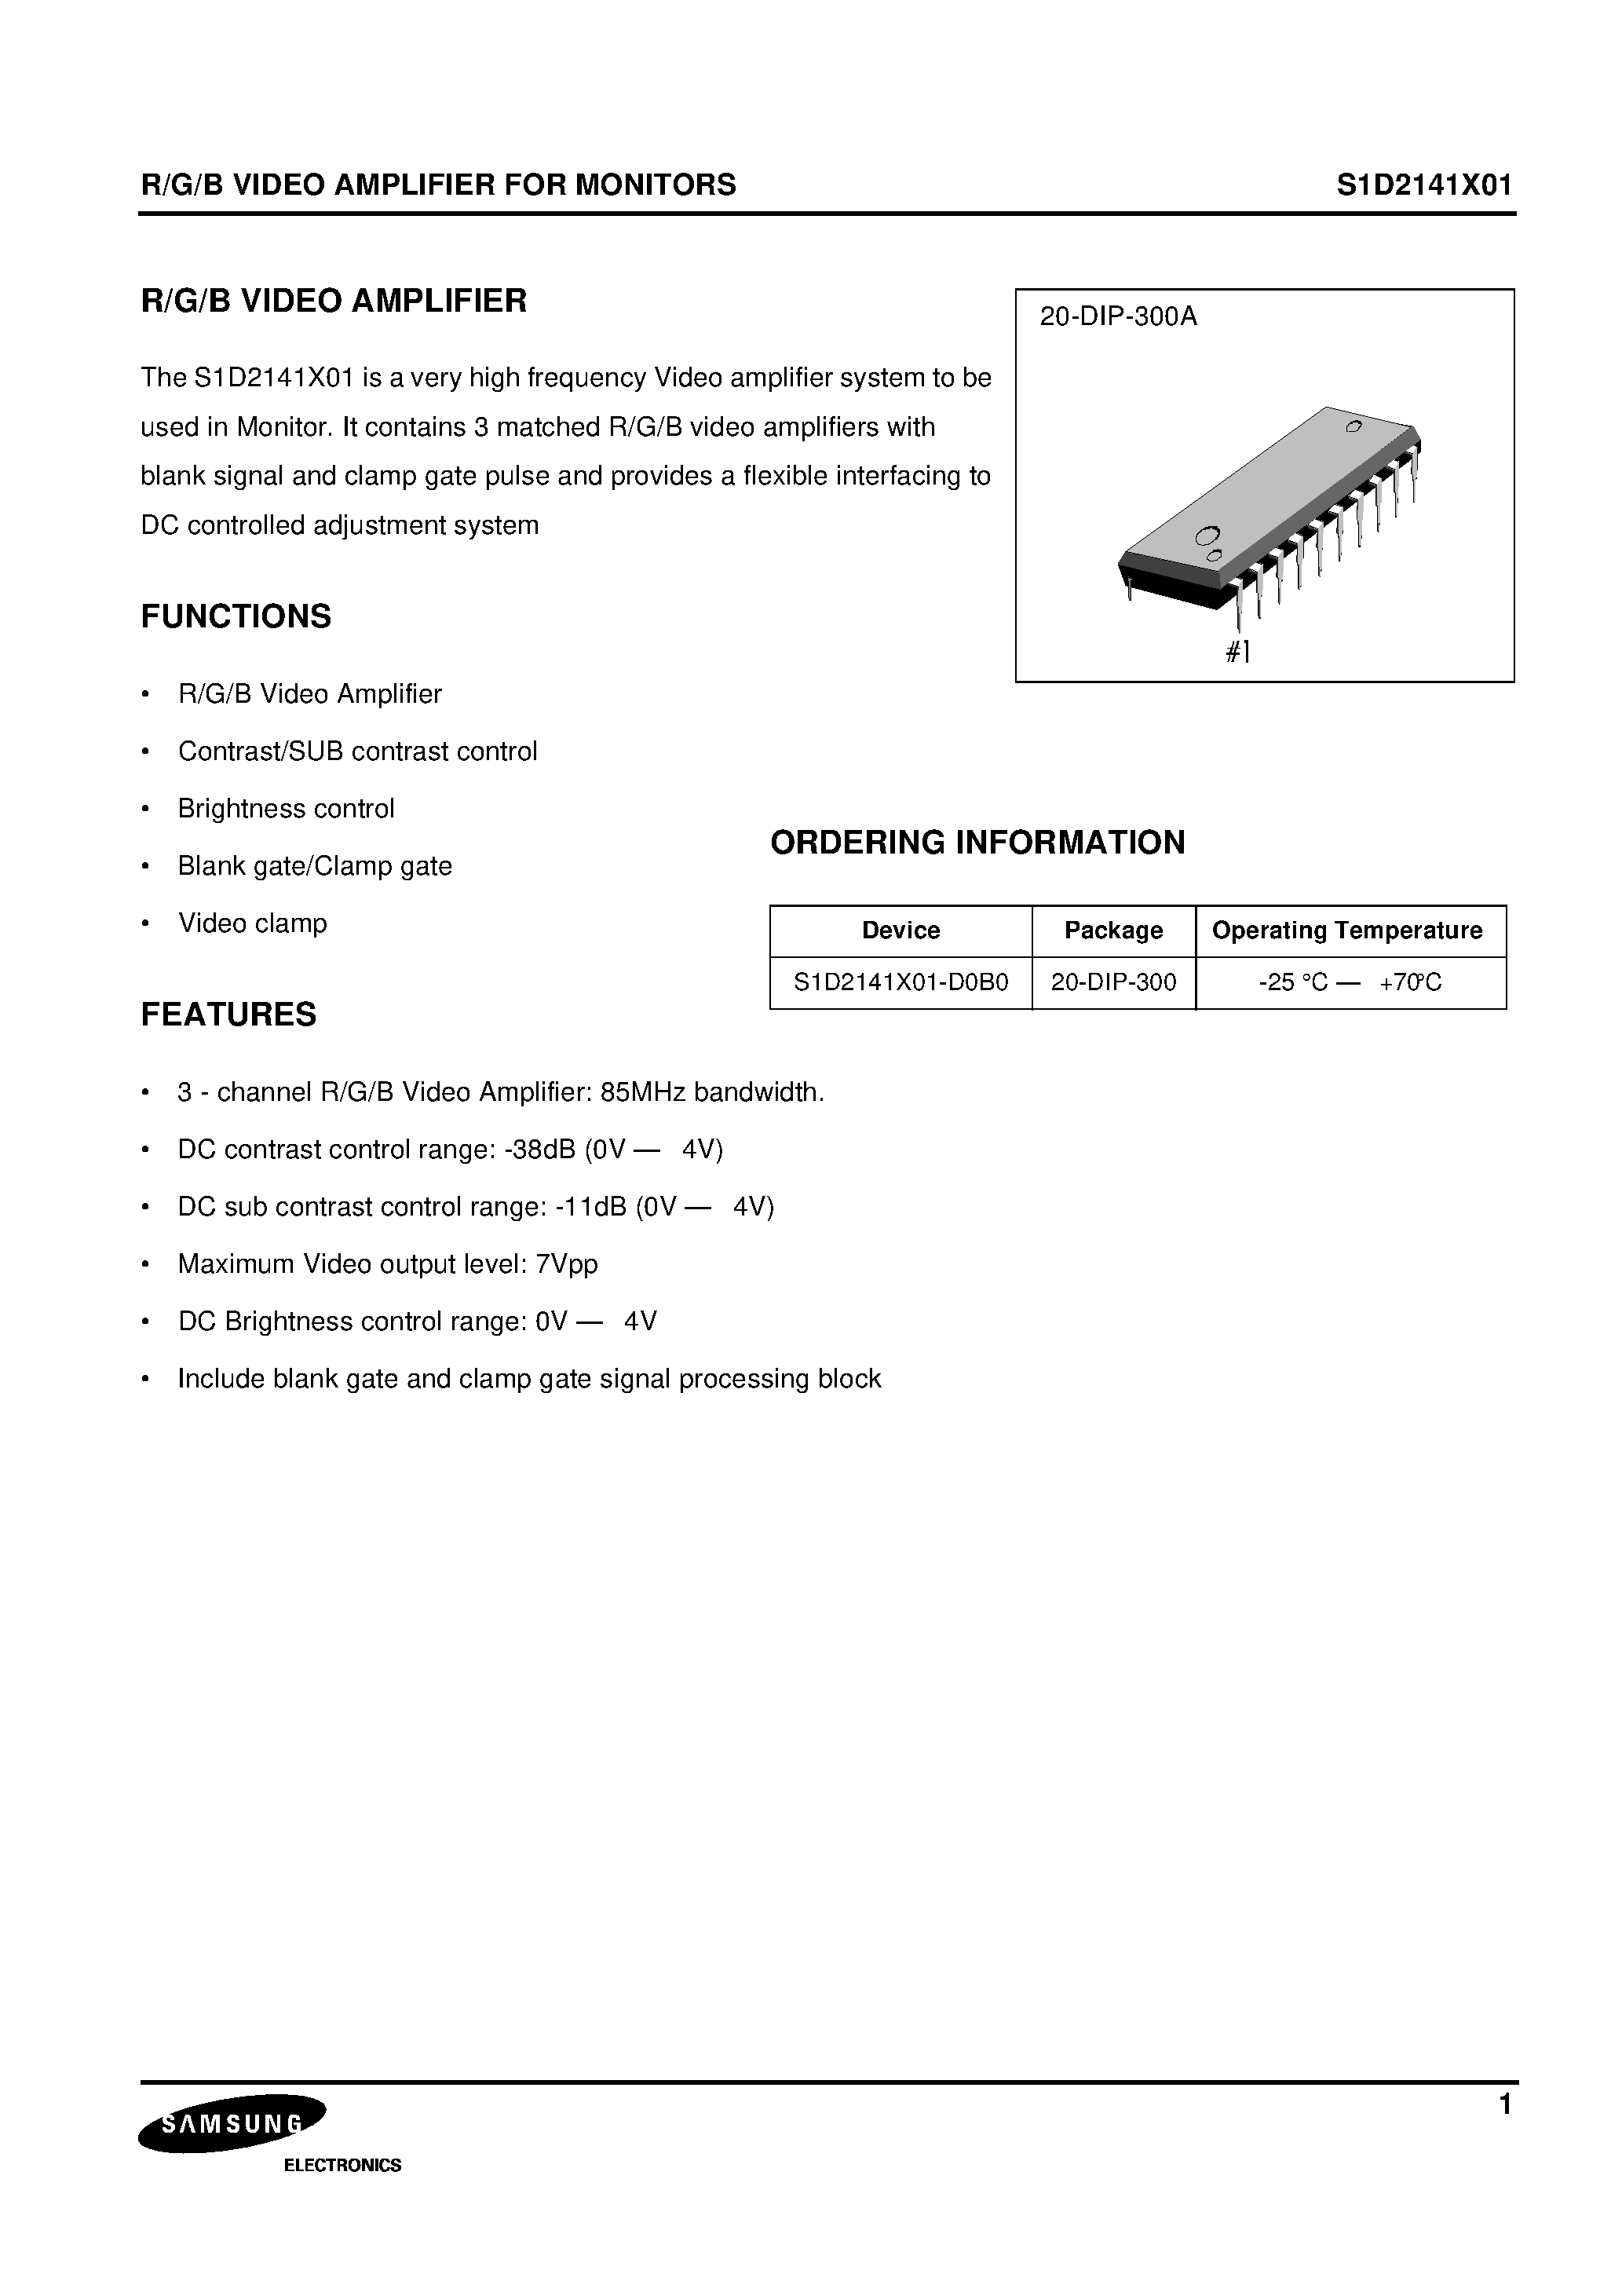 Datasheet S1D2141X01 - R/G/B VIDEO AMPLIFIER FOR MONITORS page 1